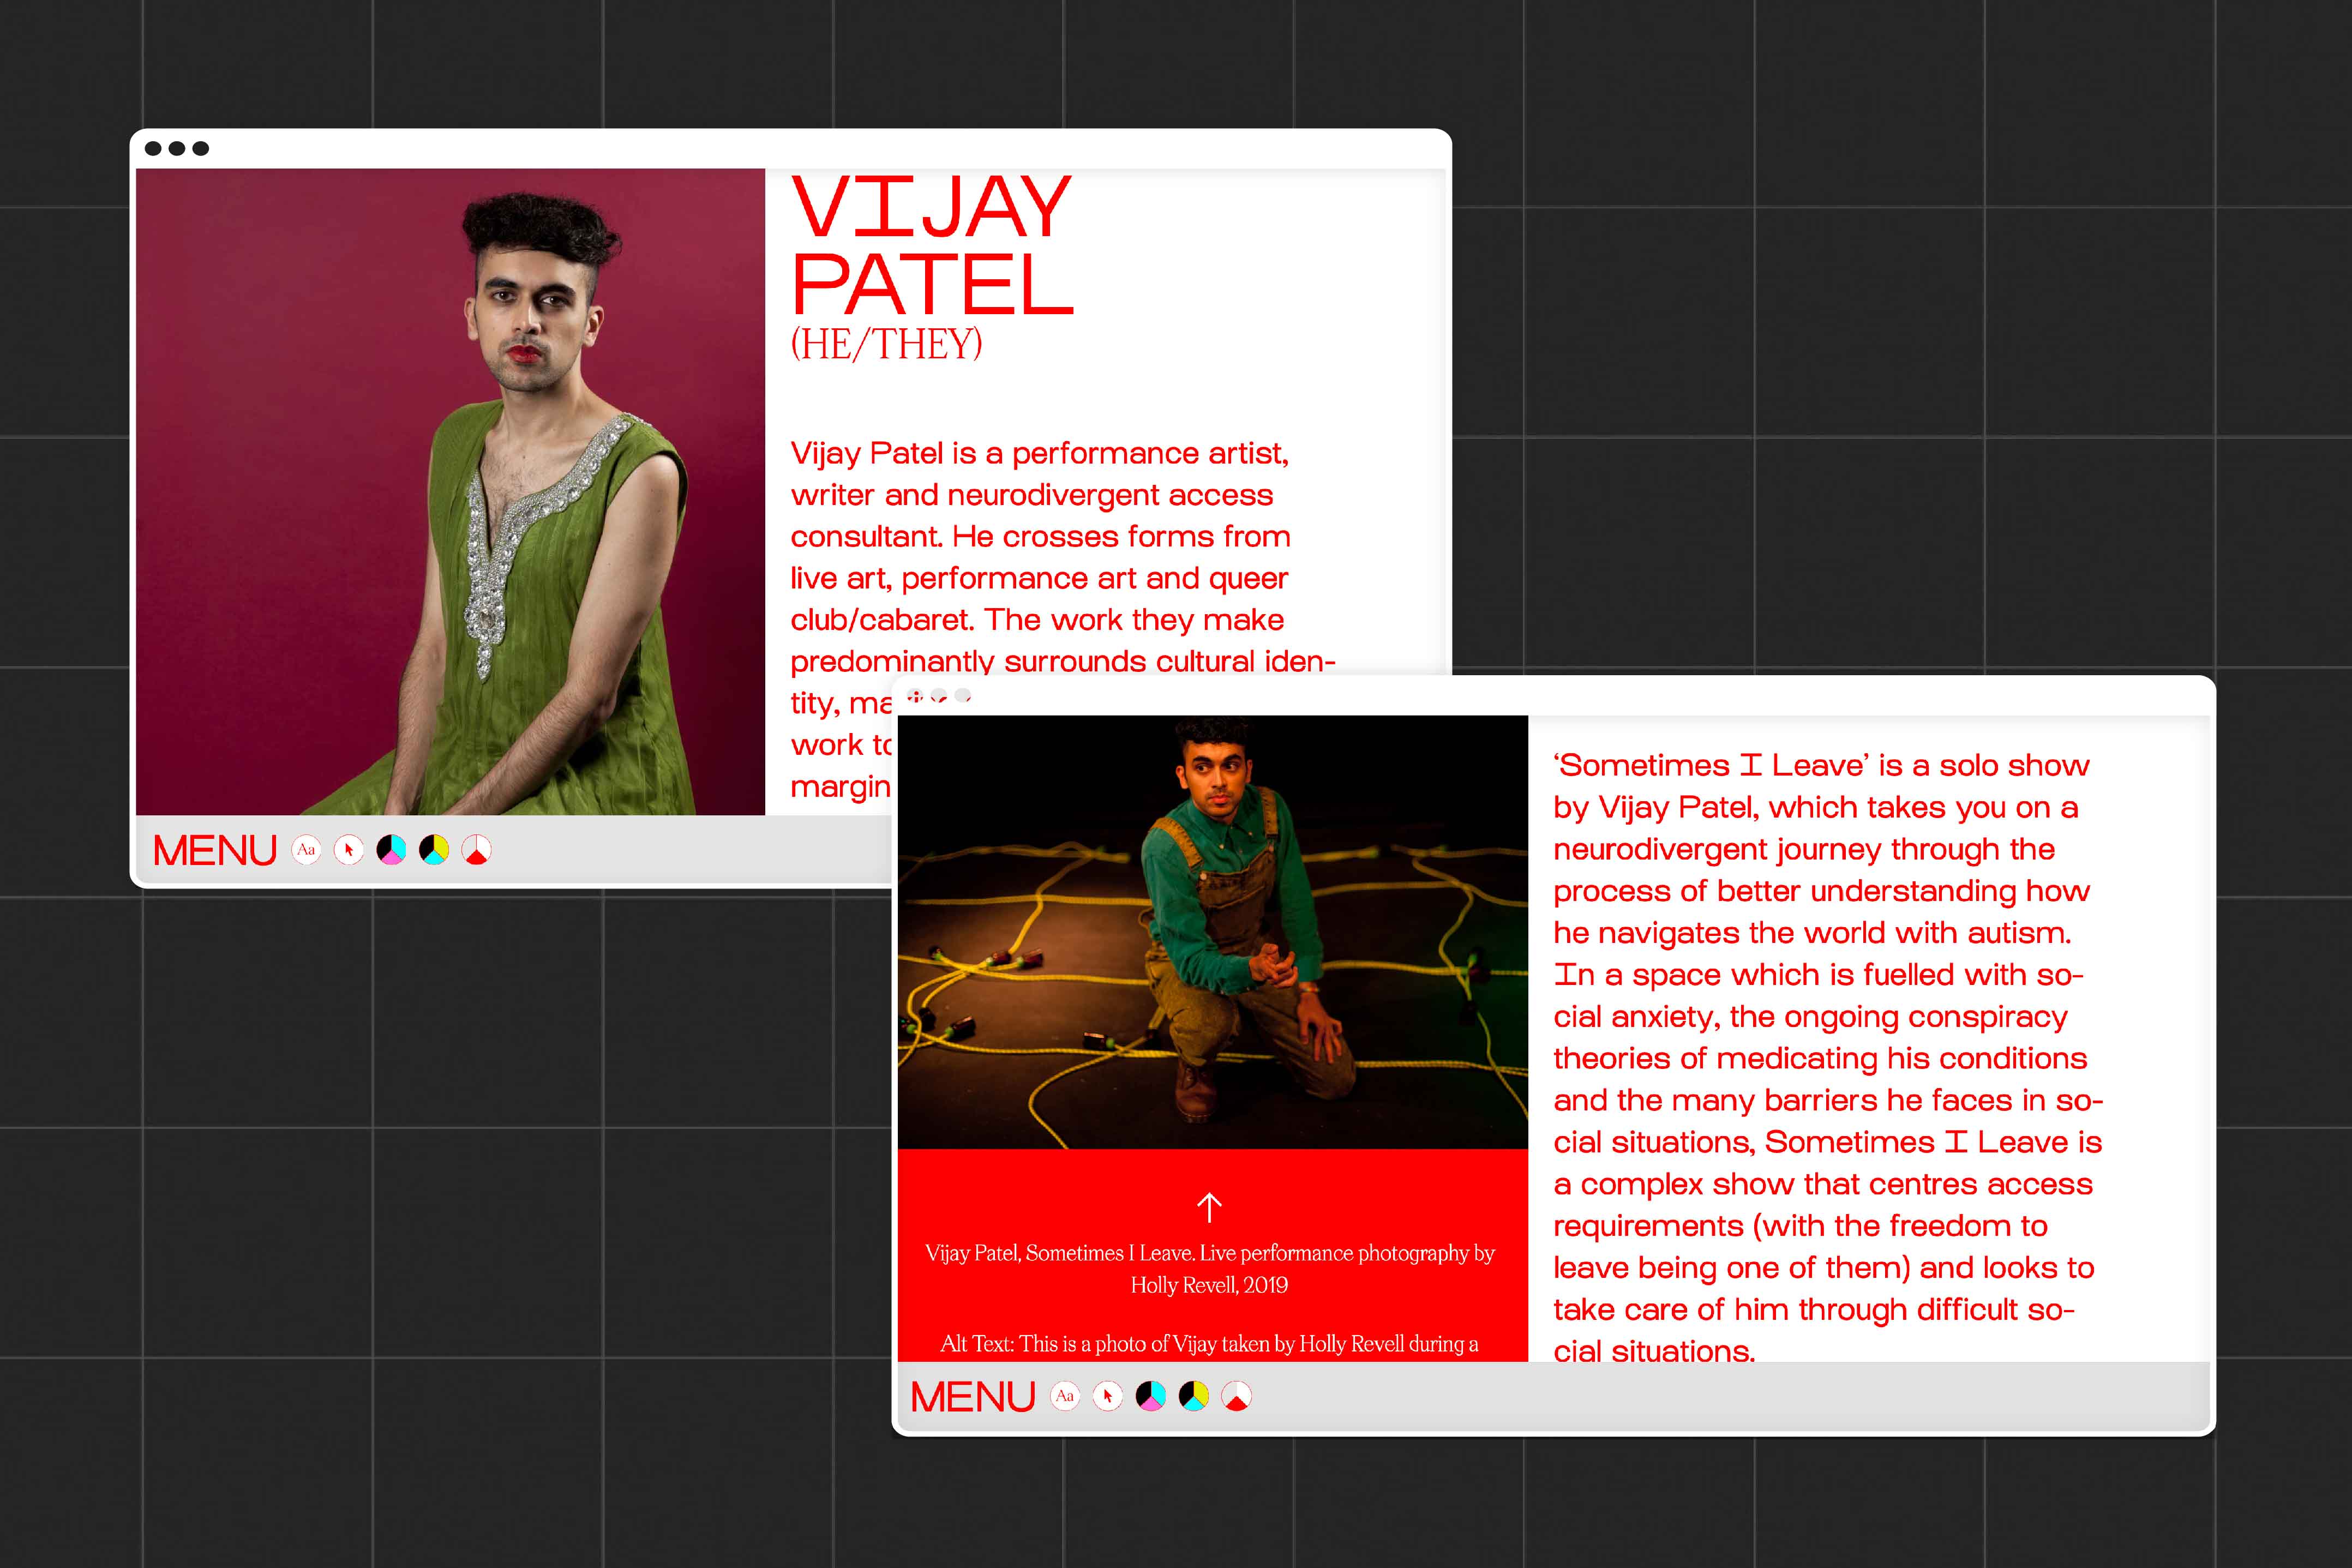 The image shows Vijay's about page, with images and text describing/showing Vijay as a performer